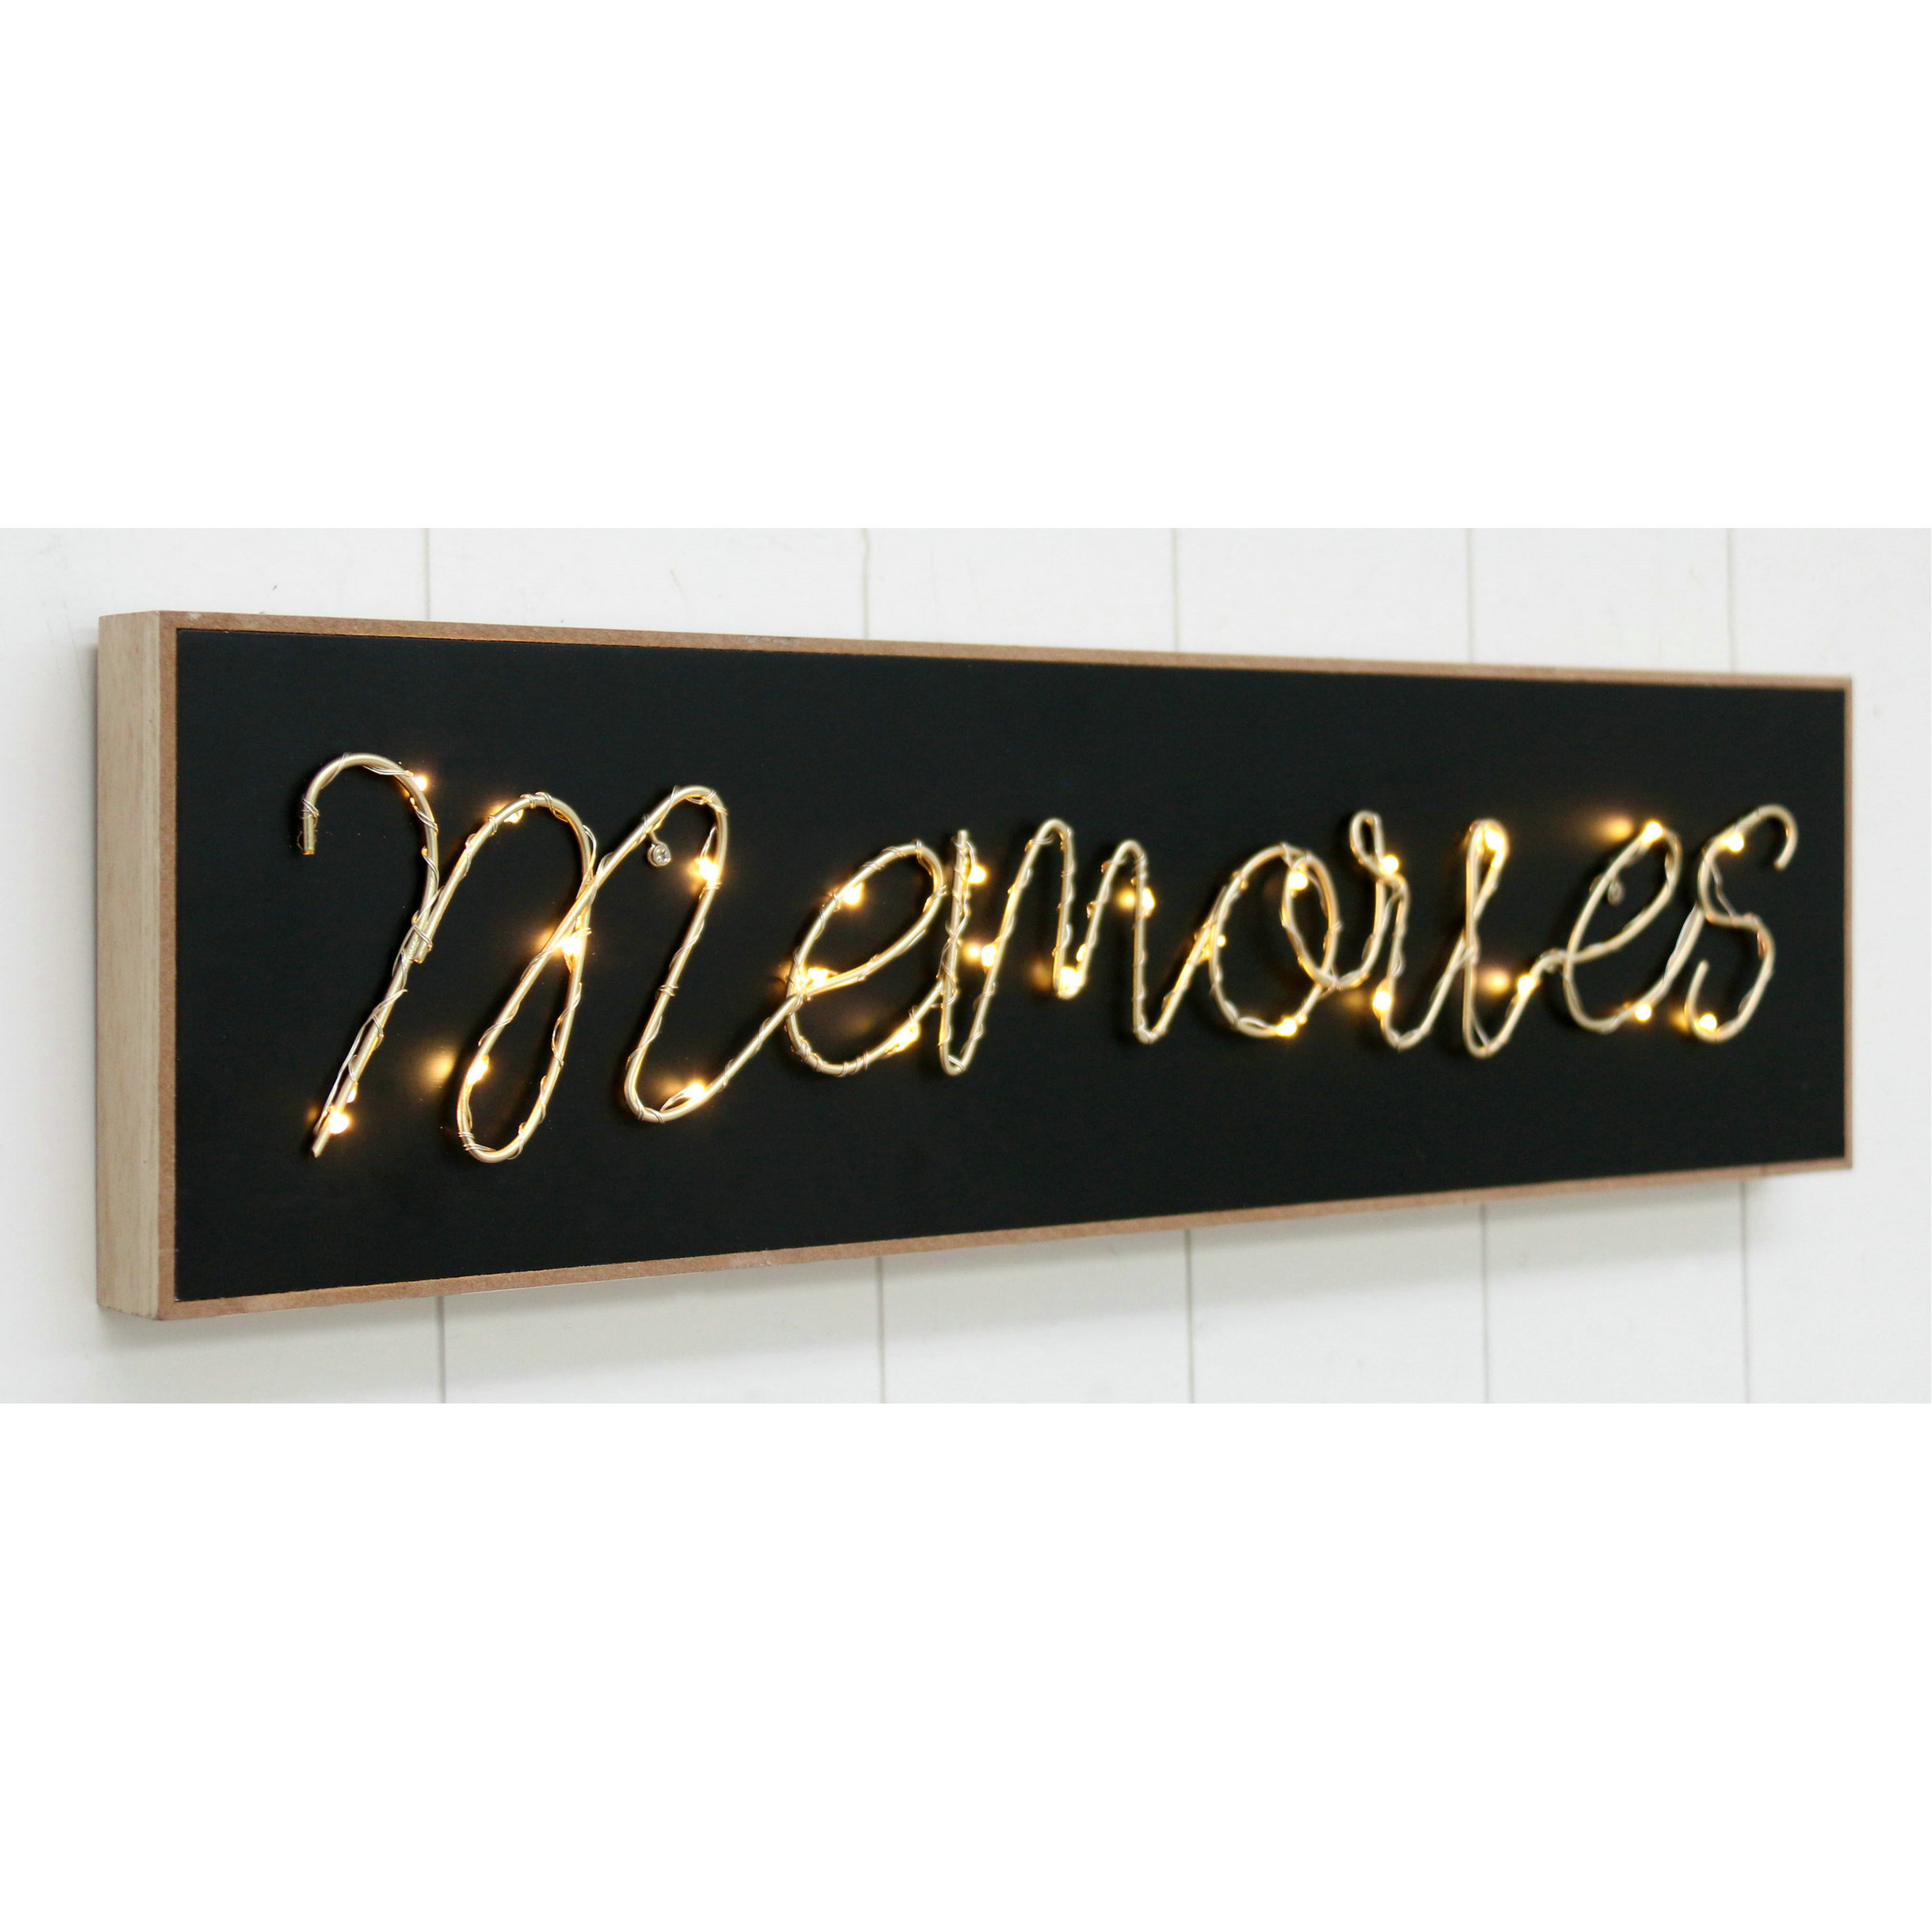 FU-21284   Wood plaque with wire LED  49x13.5x3.5cm